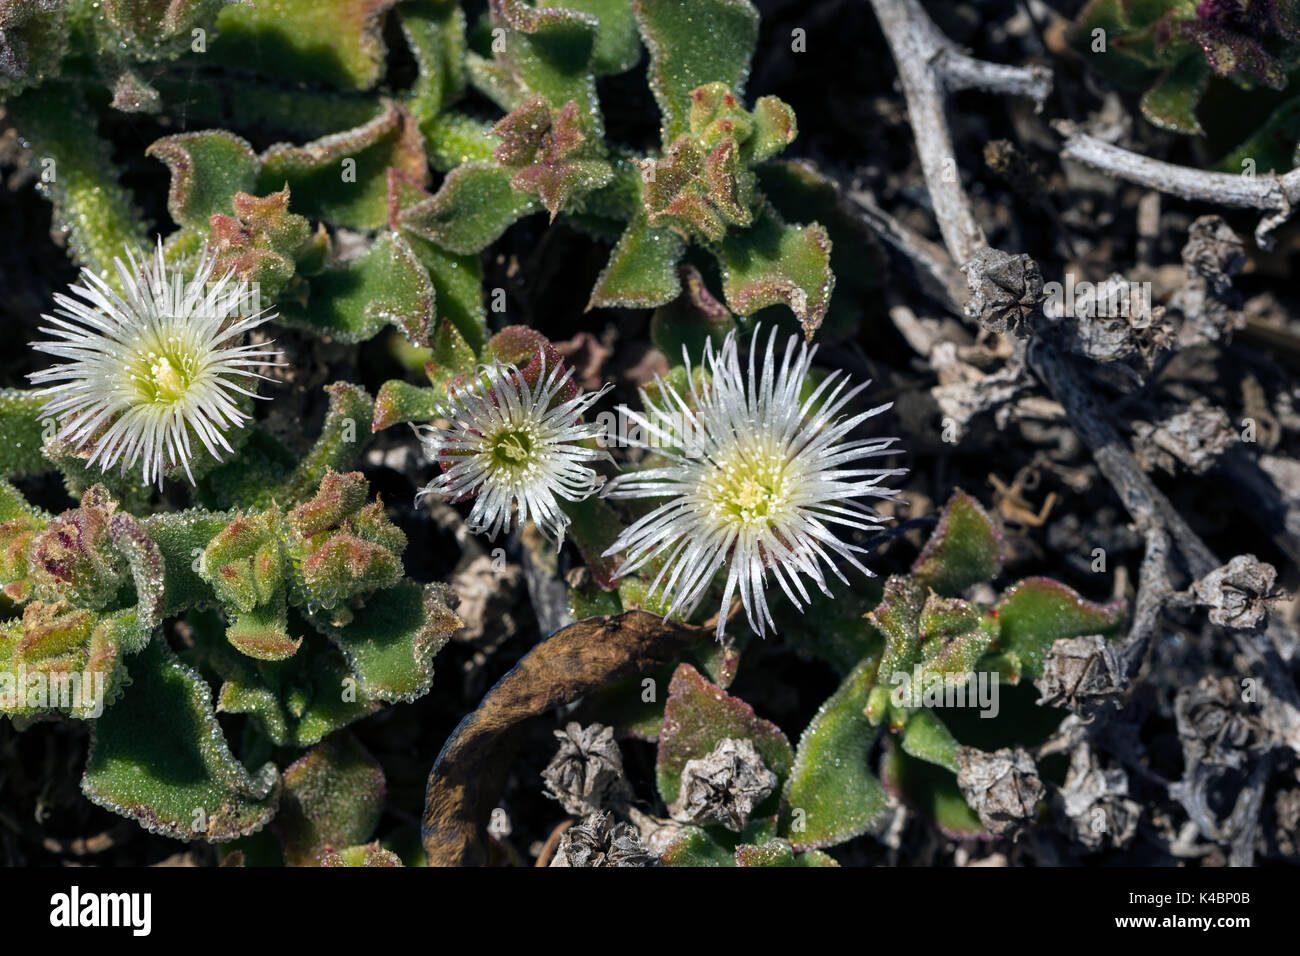 The First Plants And Flowers Of A New Vegetation In The Cold Lava Flow At Mancha Blanca, Lanzarote, Canary Islands, Spain Stock Photo